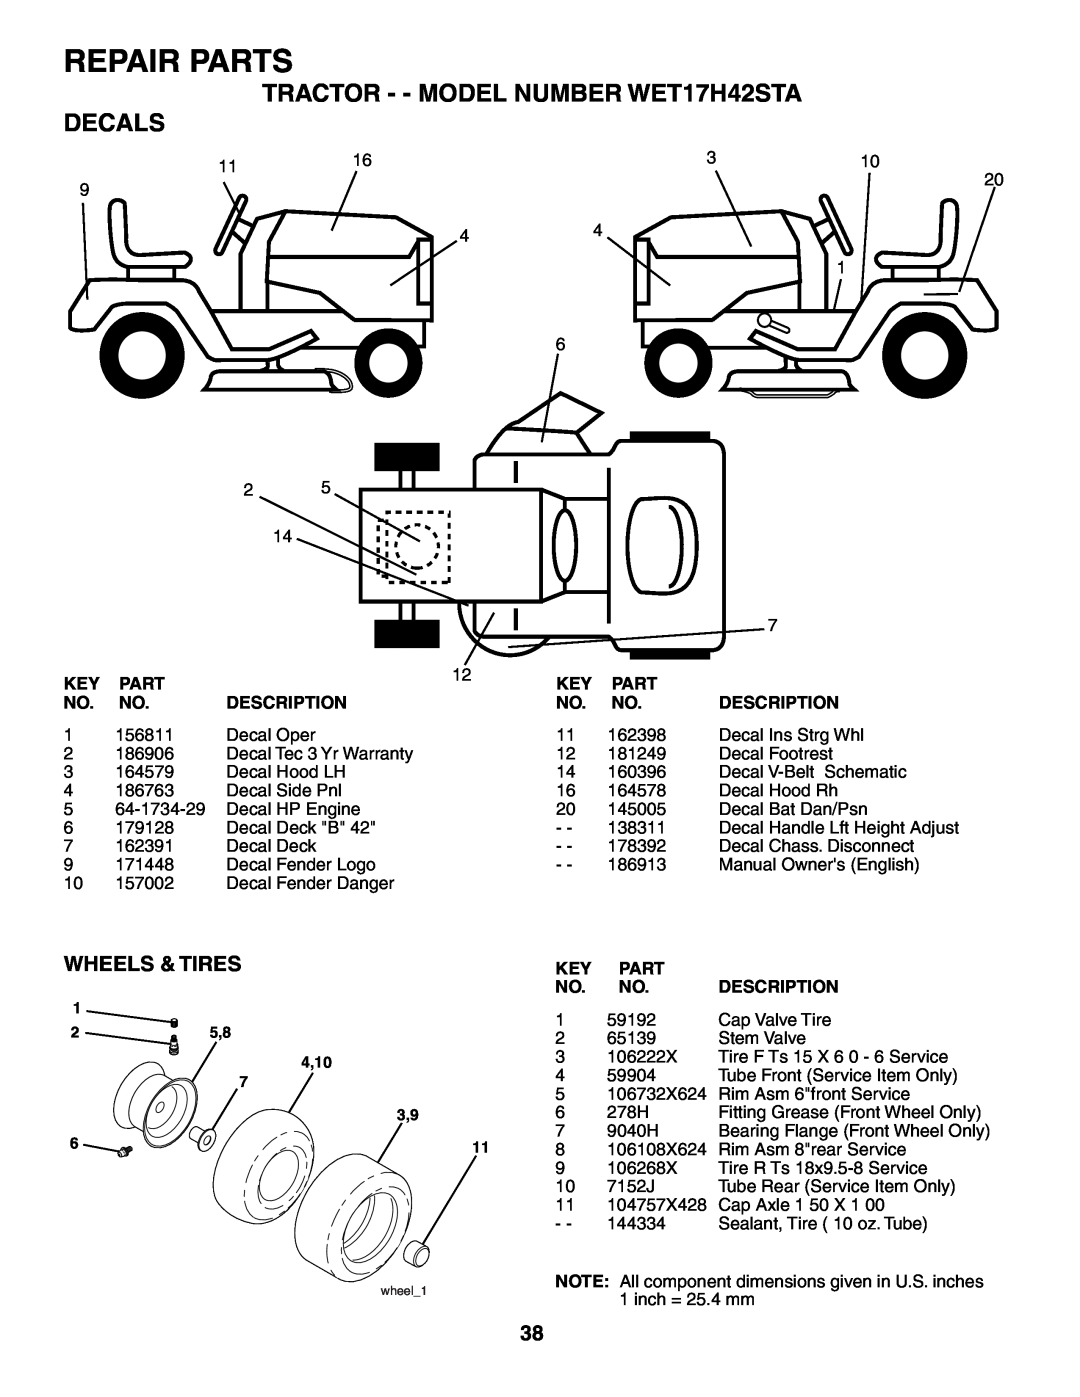 Weed Eater manual TRACTOR - - MODEL NUMBER WET17H42STA DECALS, Wheels & Tires, Repair Parts 